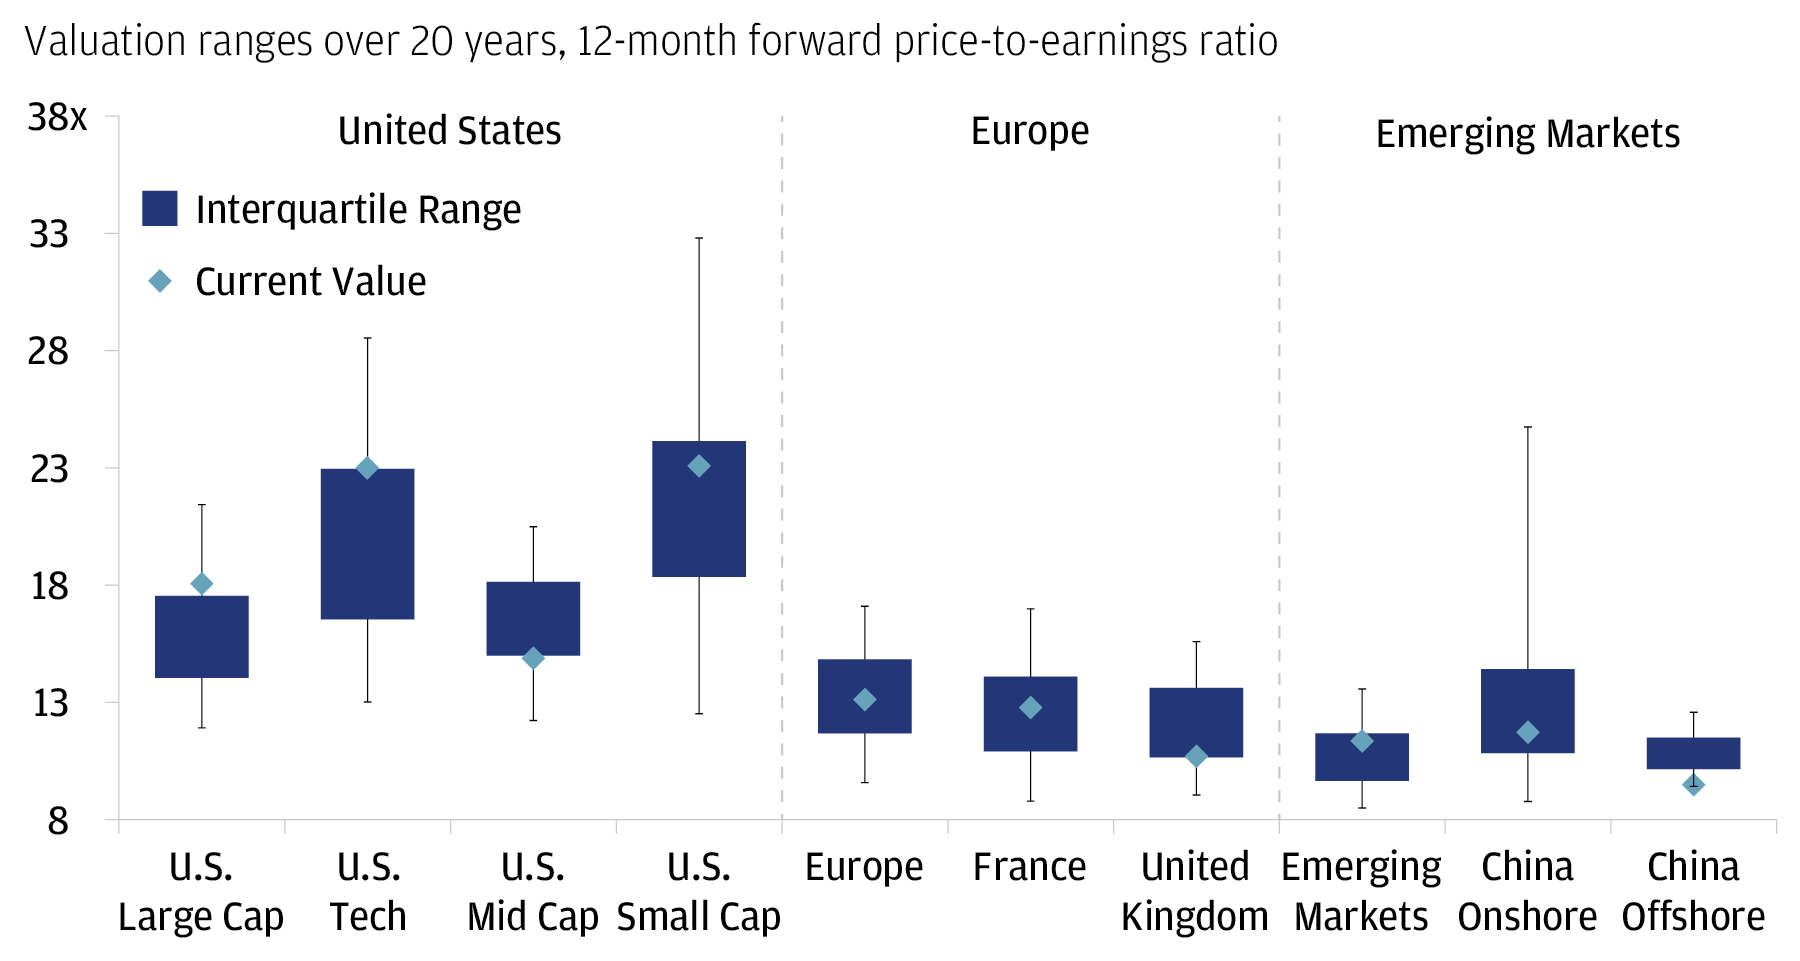 This chart depicts the 5th Percentile, interquartile range, and 95th percentile of the Price-to-Earnings ratios for stocks of different categories and geographies since 2003.